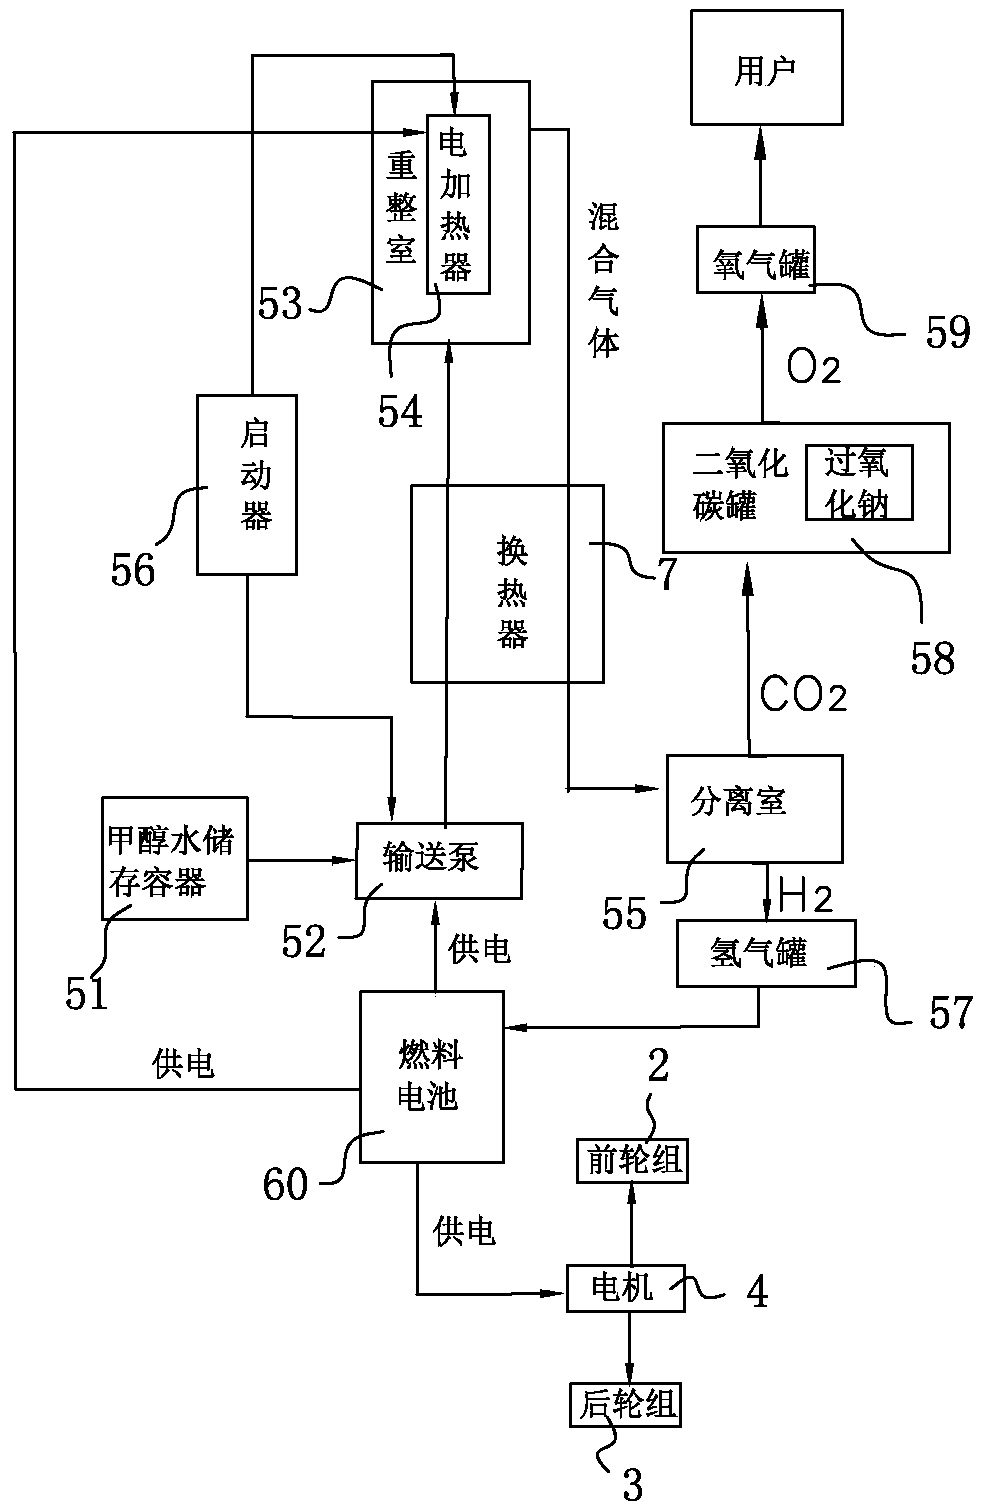 Electric wheelchair with oxygen supplying system